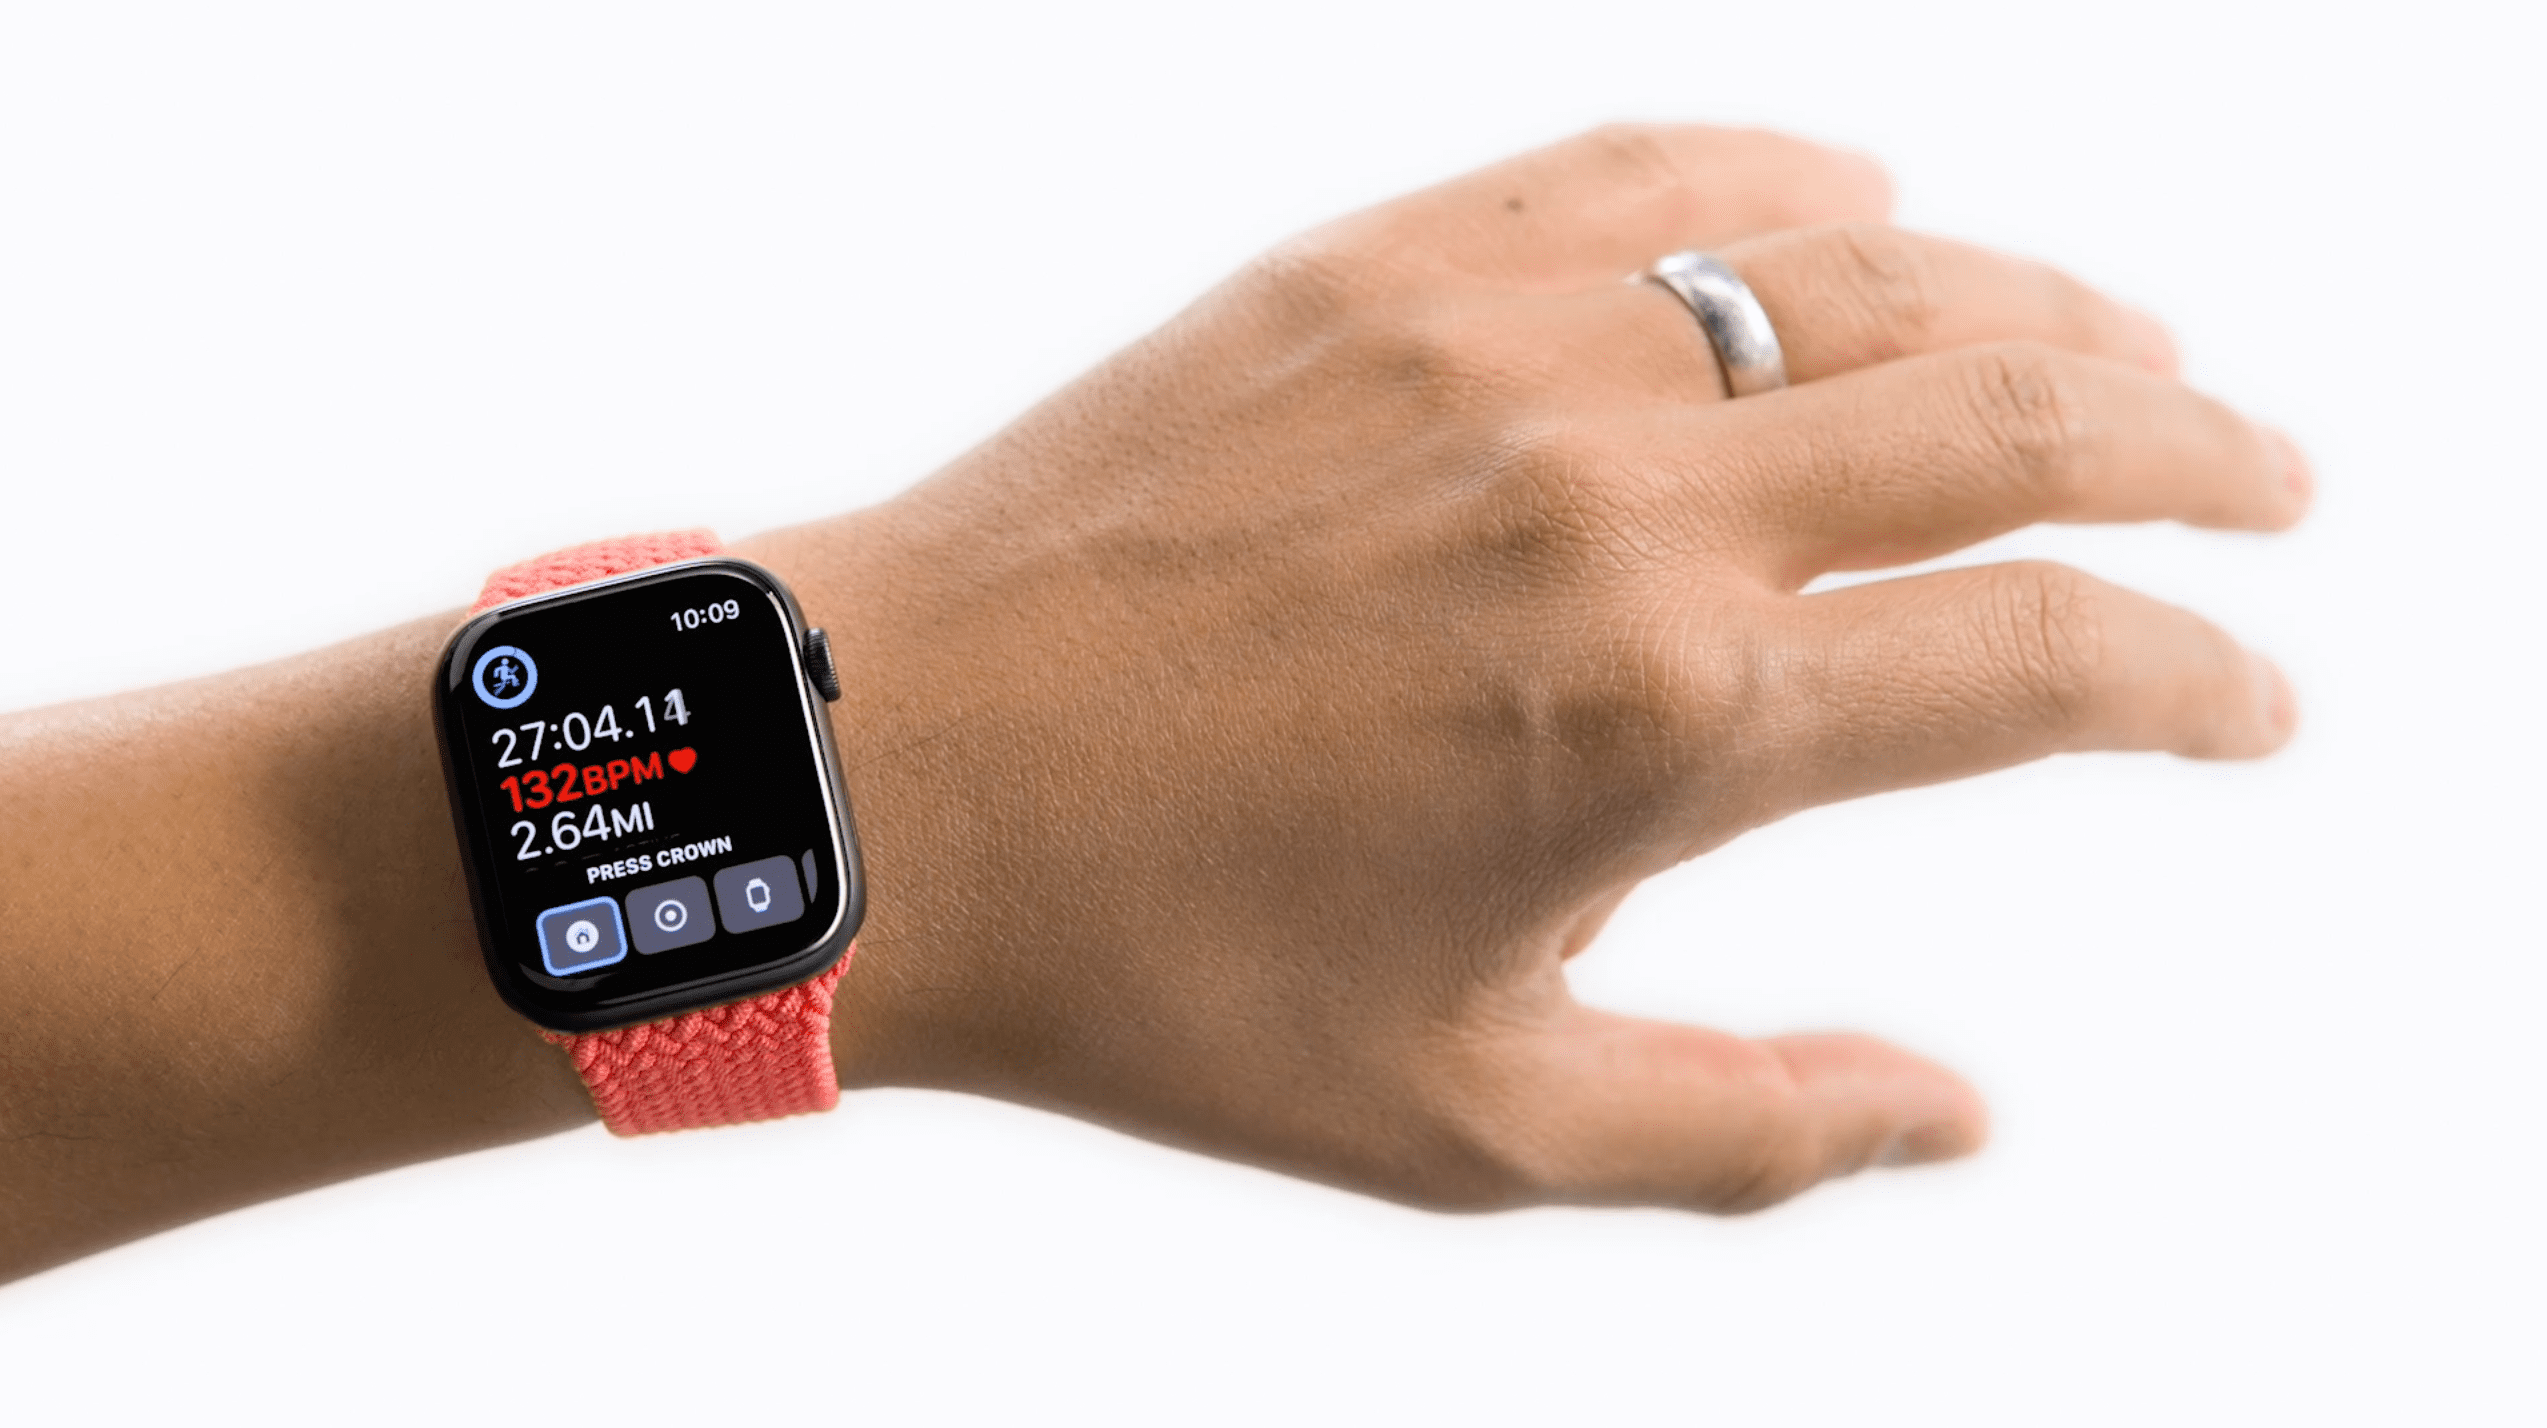 How To Use AssistiveTouch on Apple Watch - 2